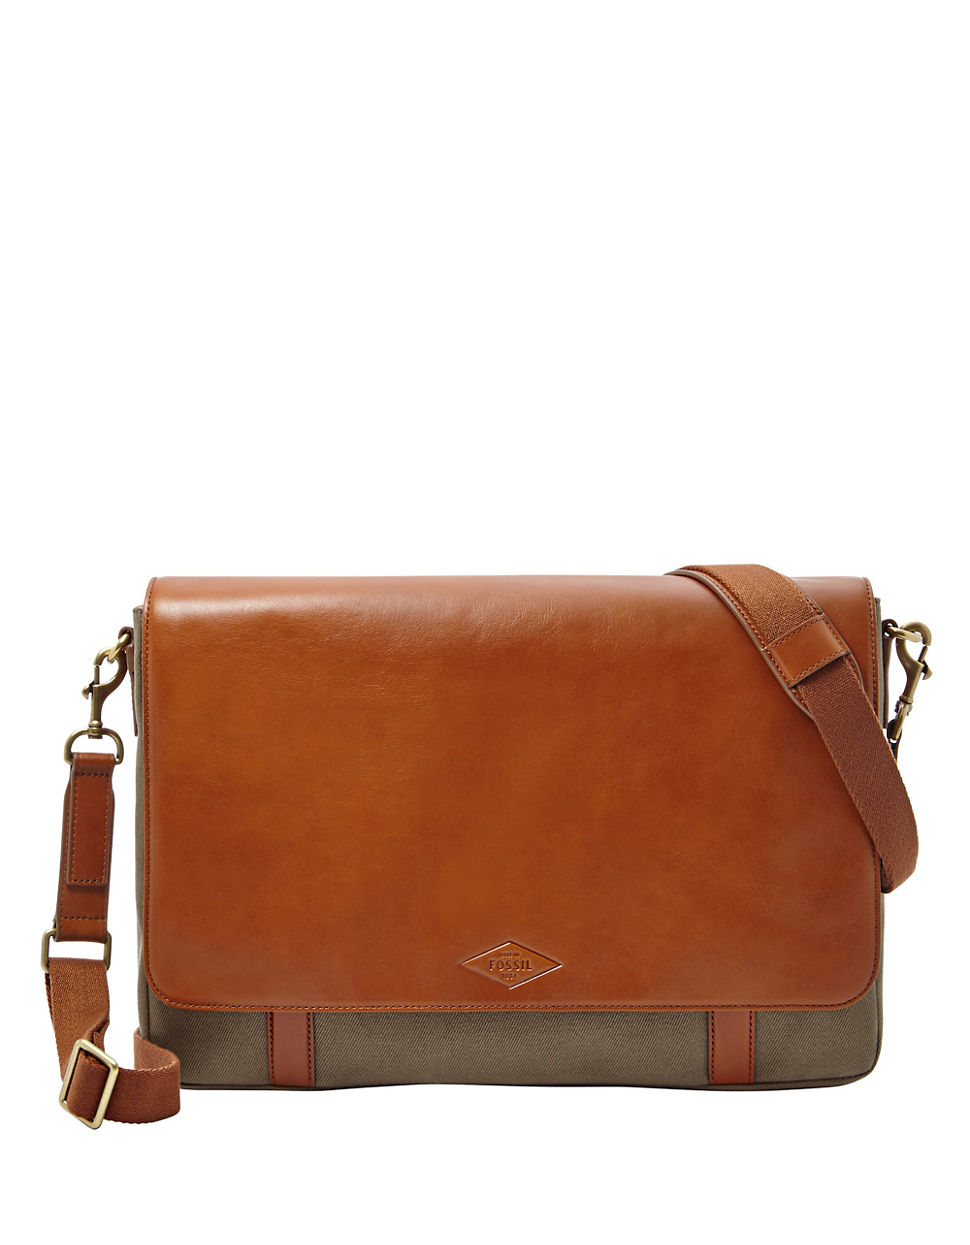 Lyst - Fossil Leather Trim Messenger Bag in Brown for Men